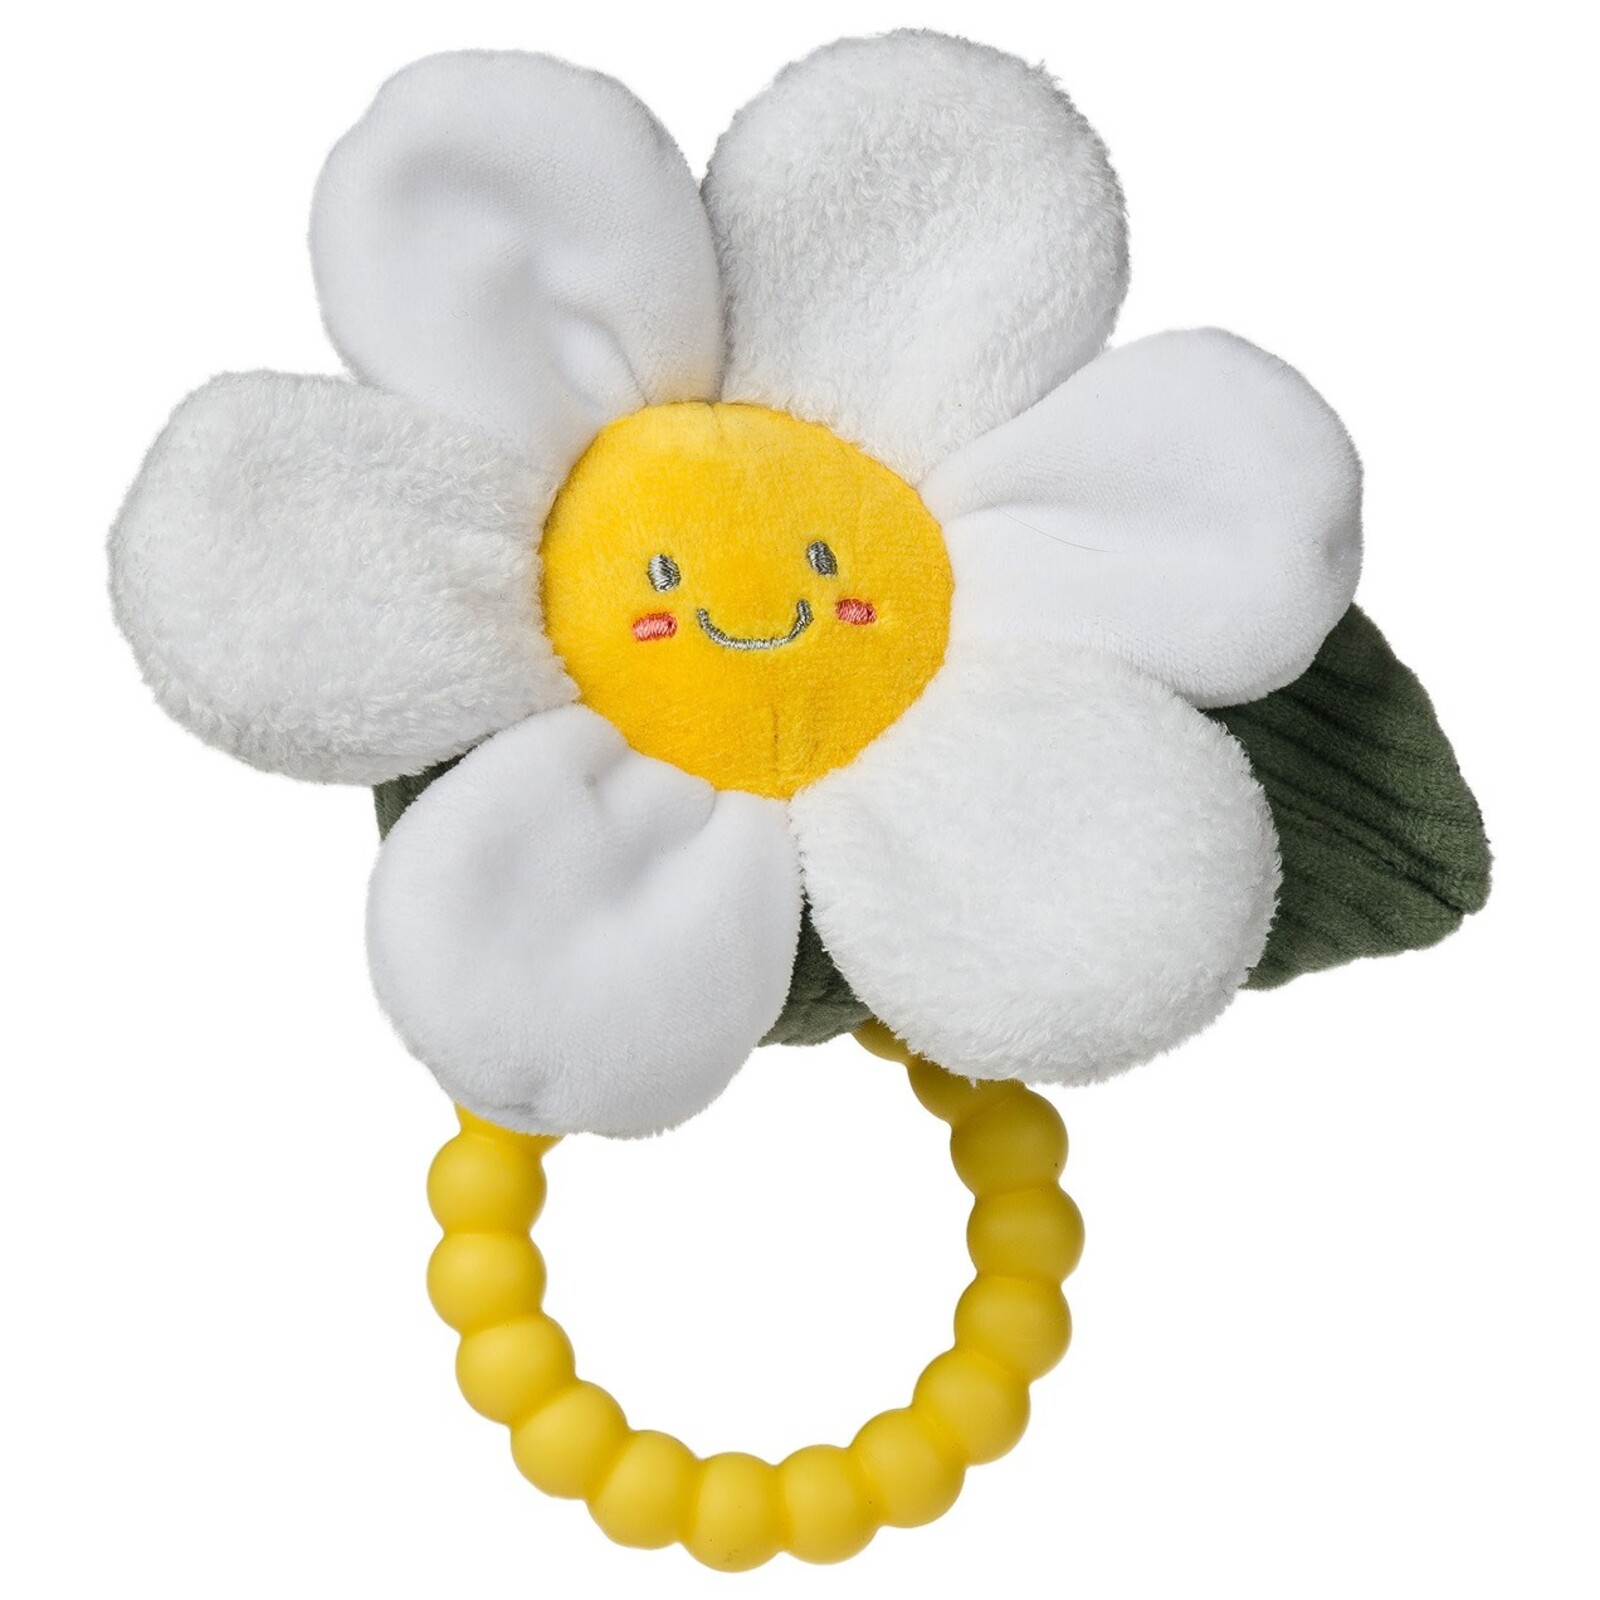 Mary Meyer Sweet Soothie Daisy Teether Rattle   44240 loading=